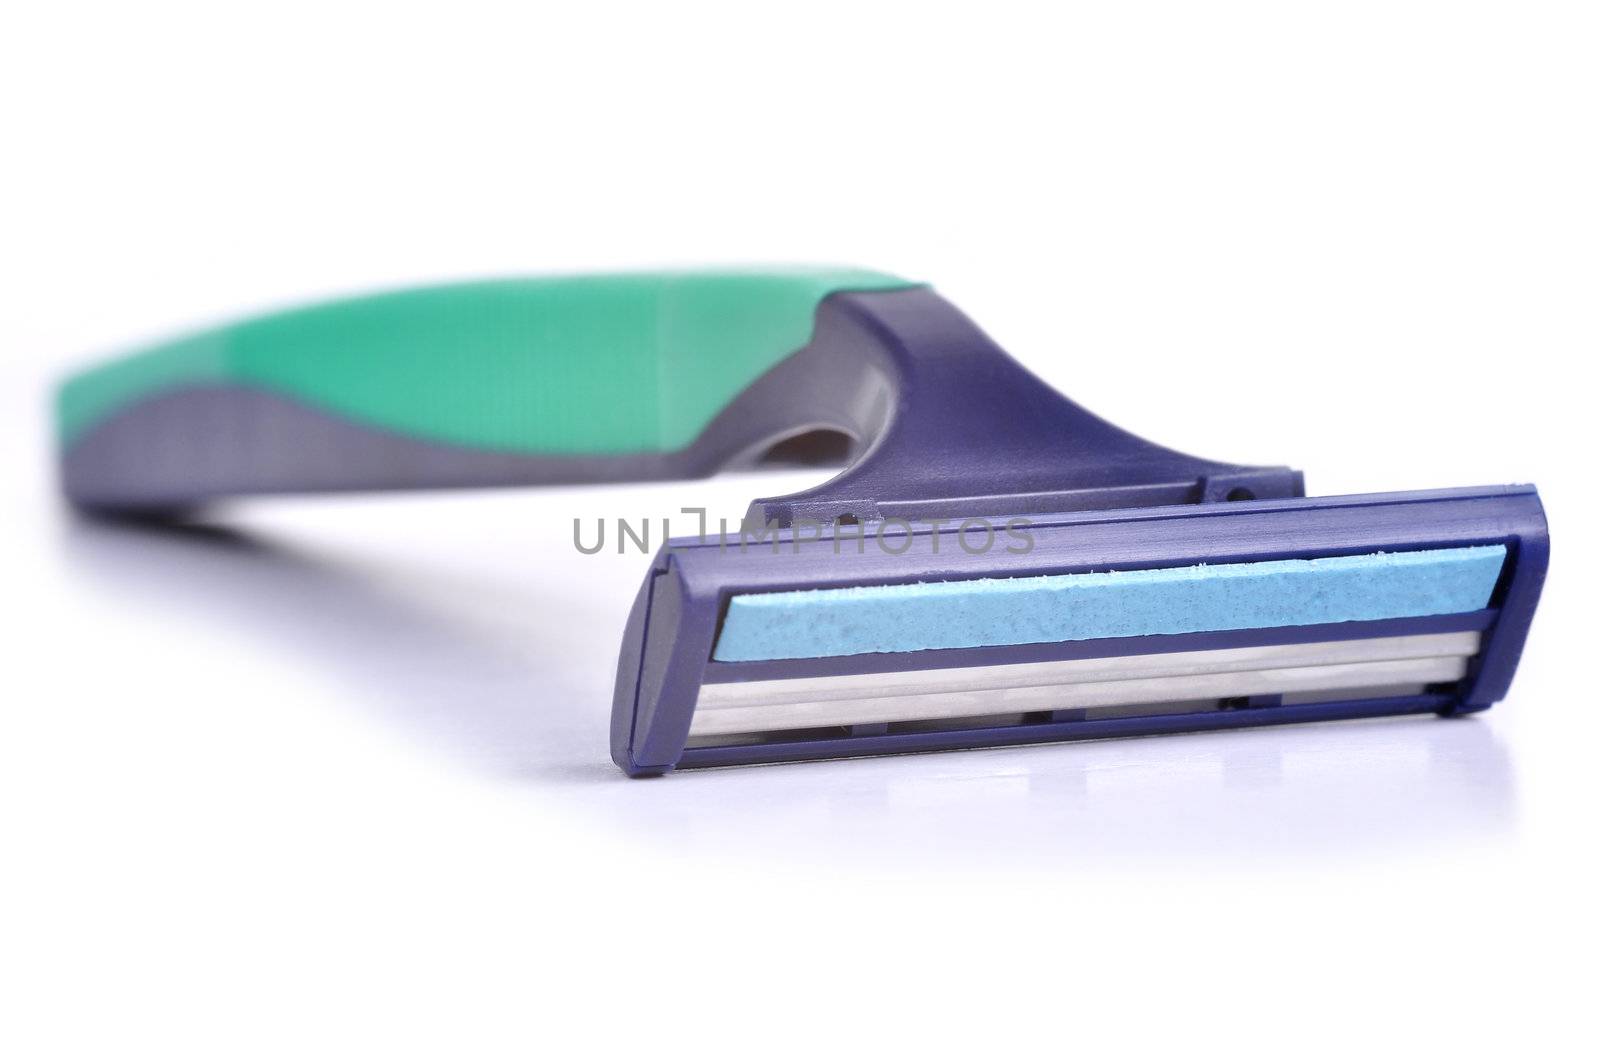 Disposable razor on a white background with some reflection underneath